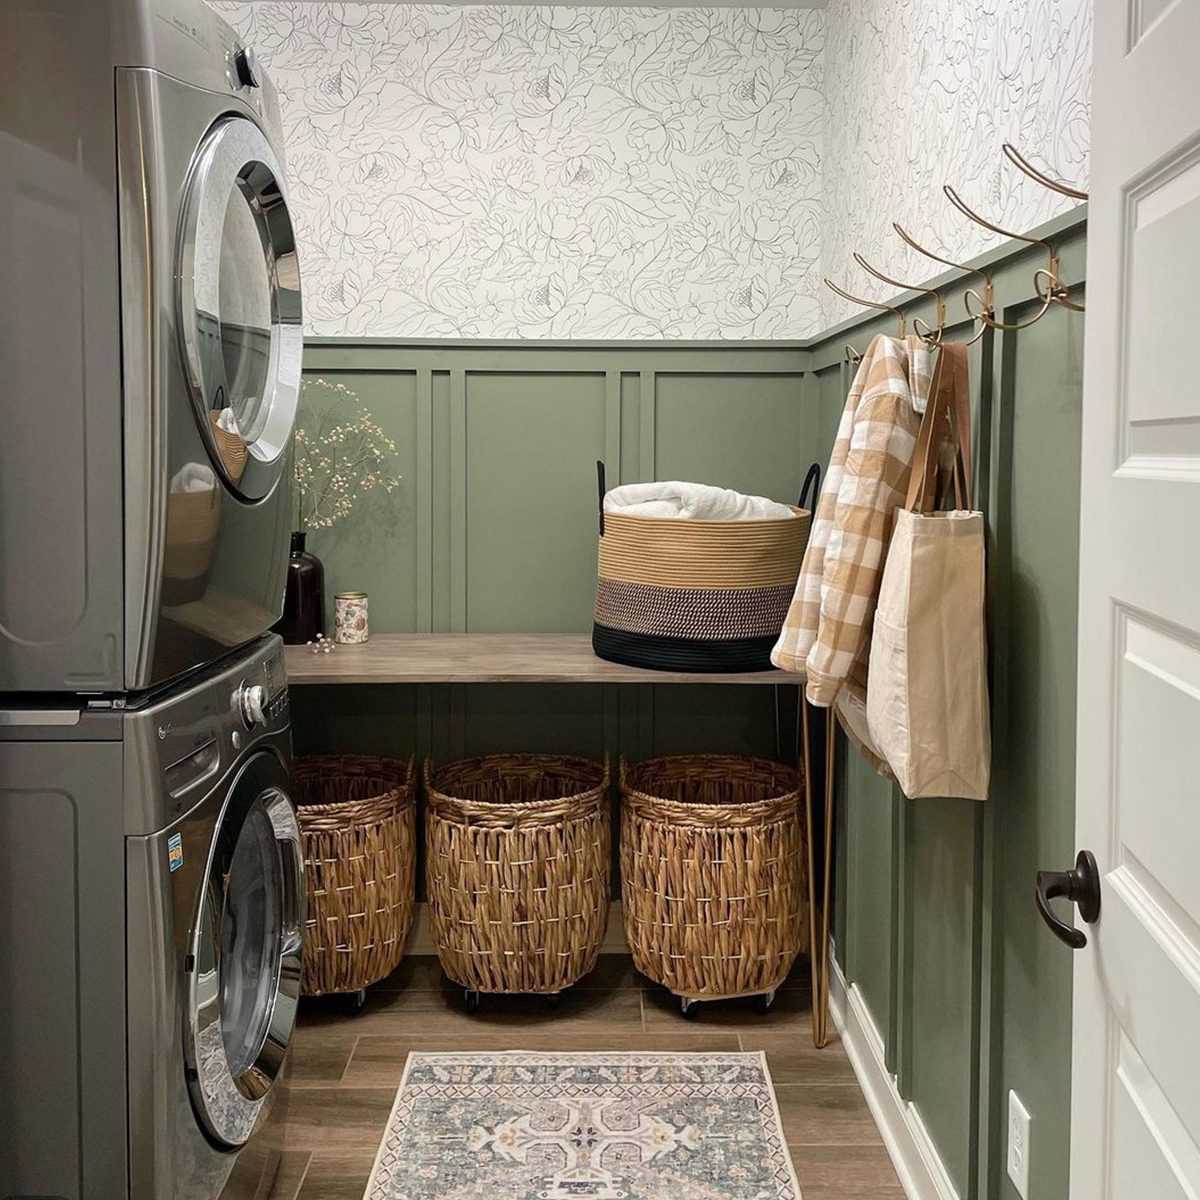 Board And Batten Laundry Room Design Courtesy Onteallane A.freckled.fawn.design